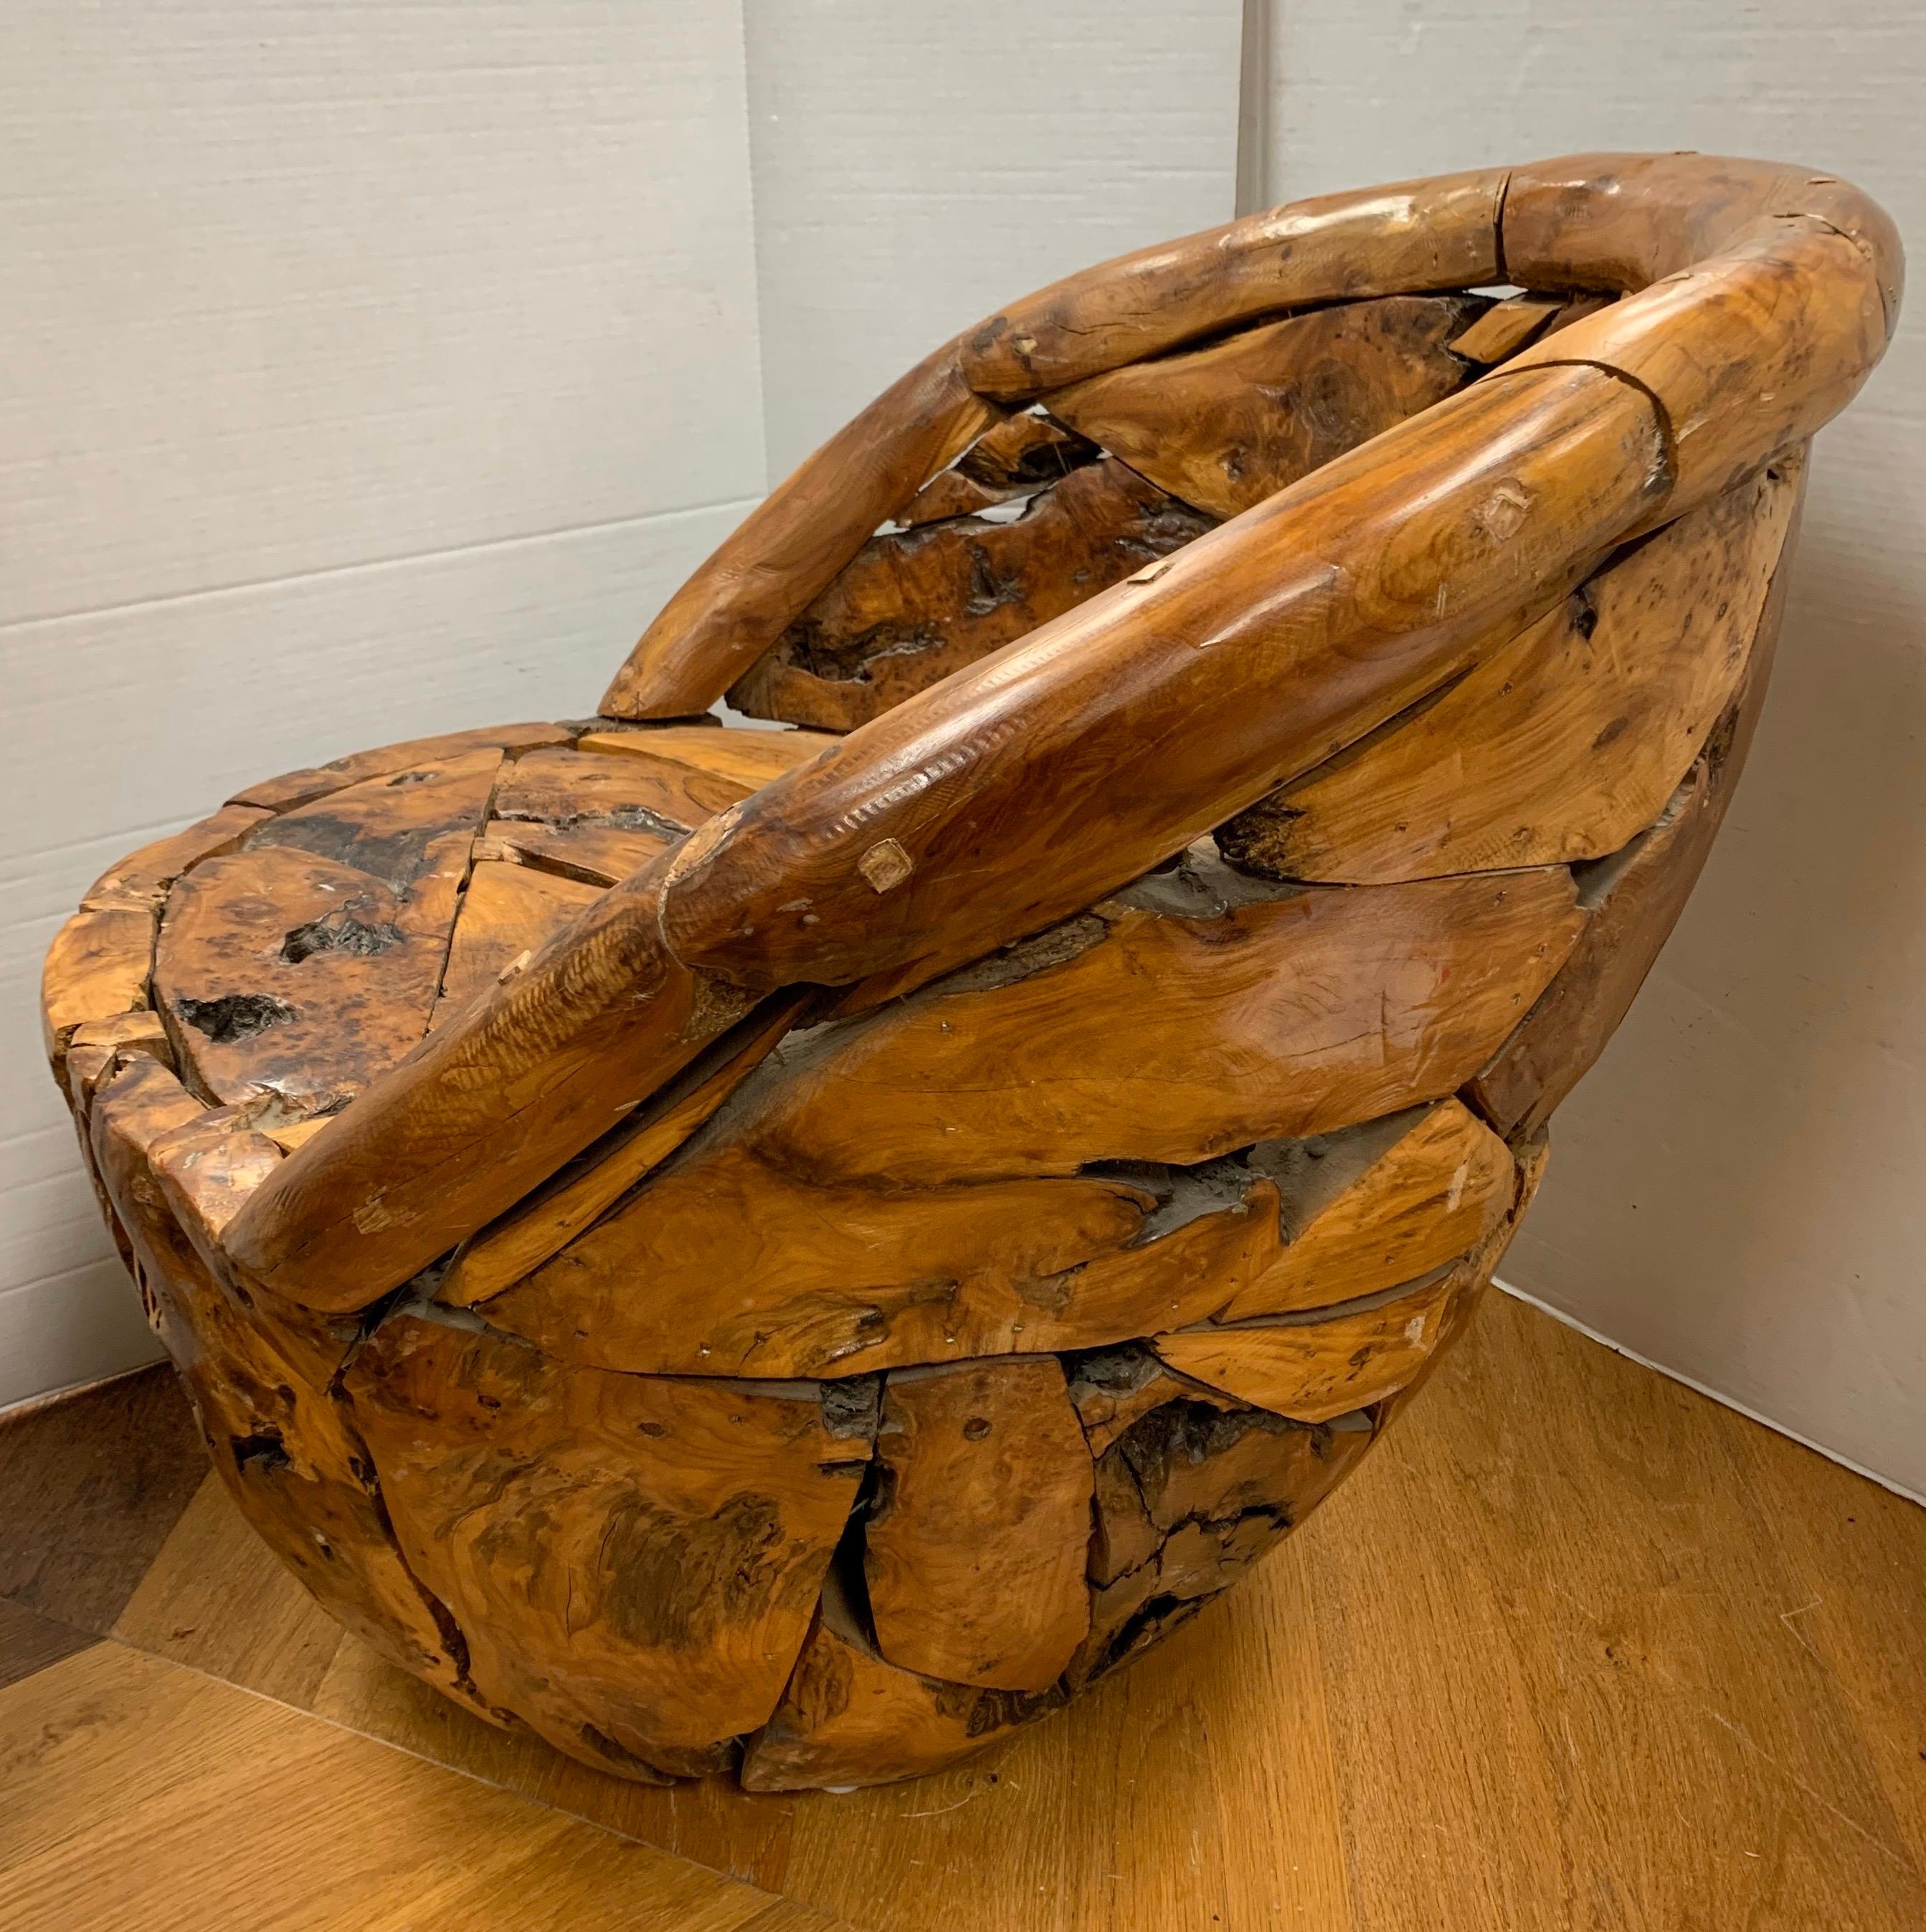 Unique club chair made of a teak root wood pieced together to form a circular seat and round back. Definitely a statement piece that would look great in any room.